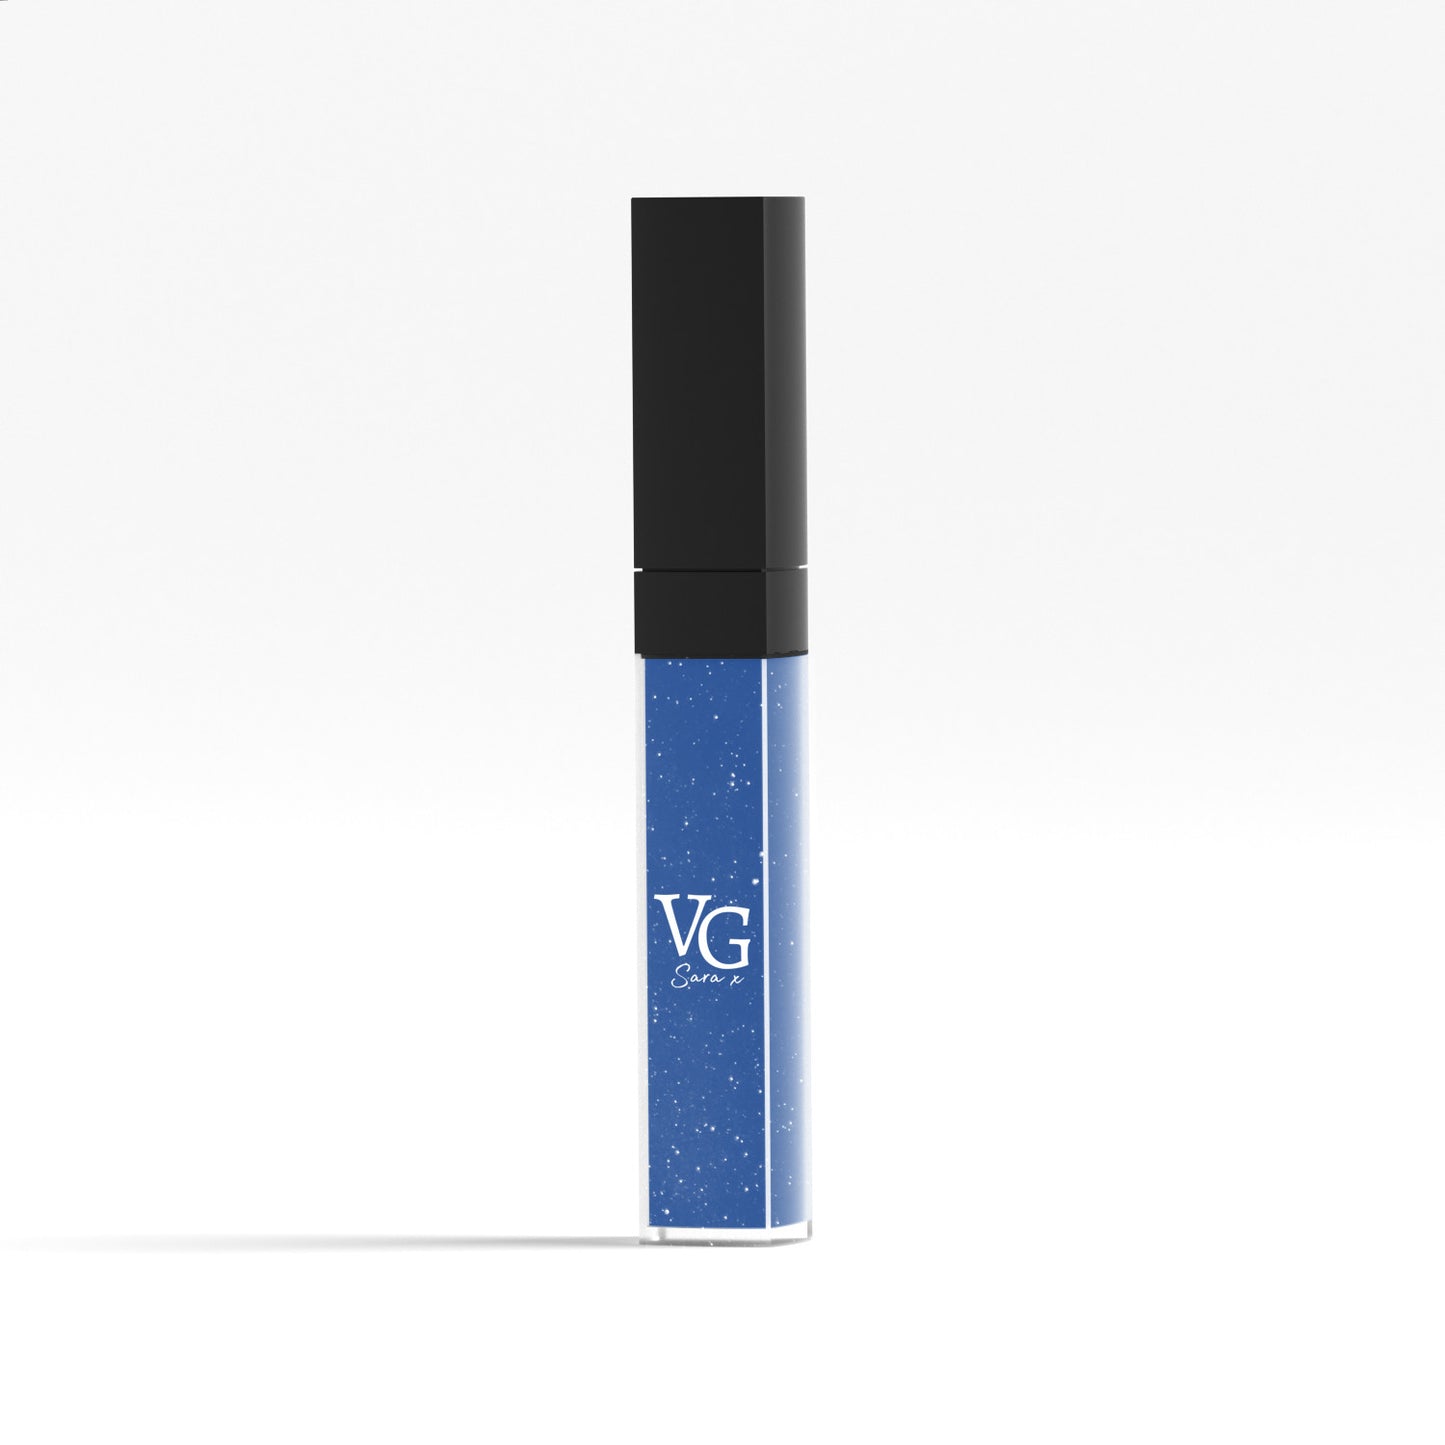 Soft colored blue vegan liquid lipstick by VG for long-lasting color